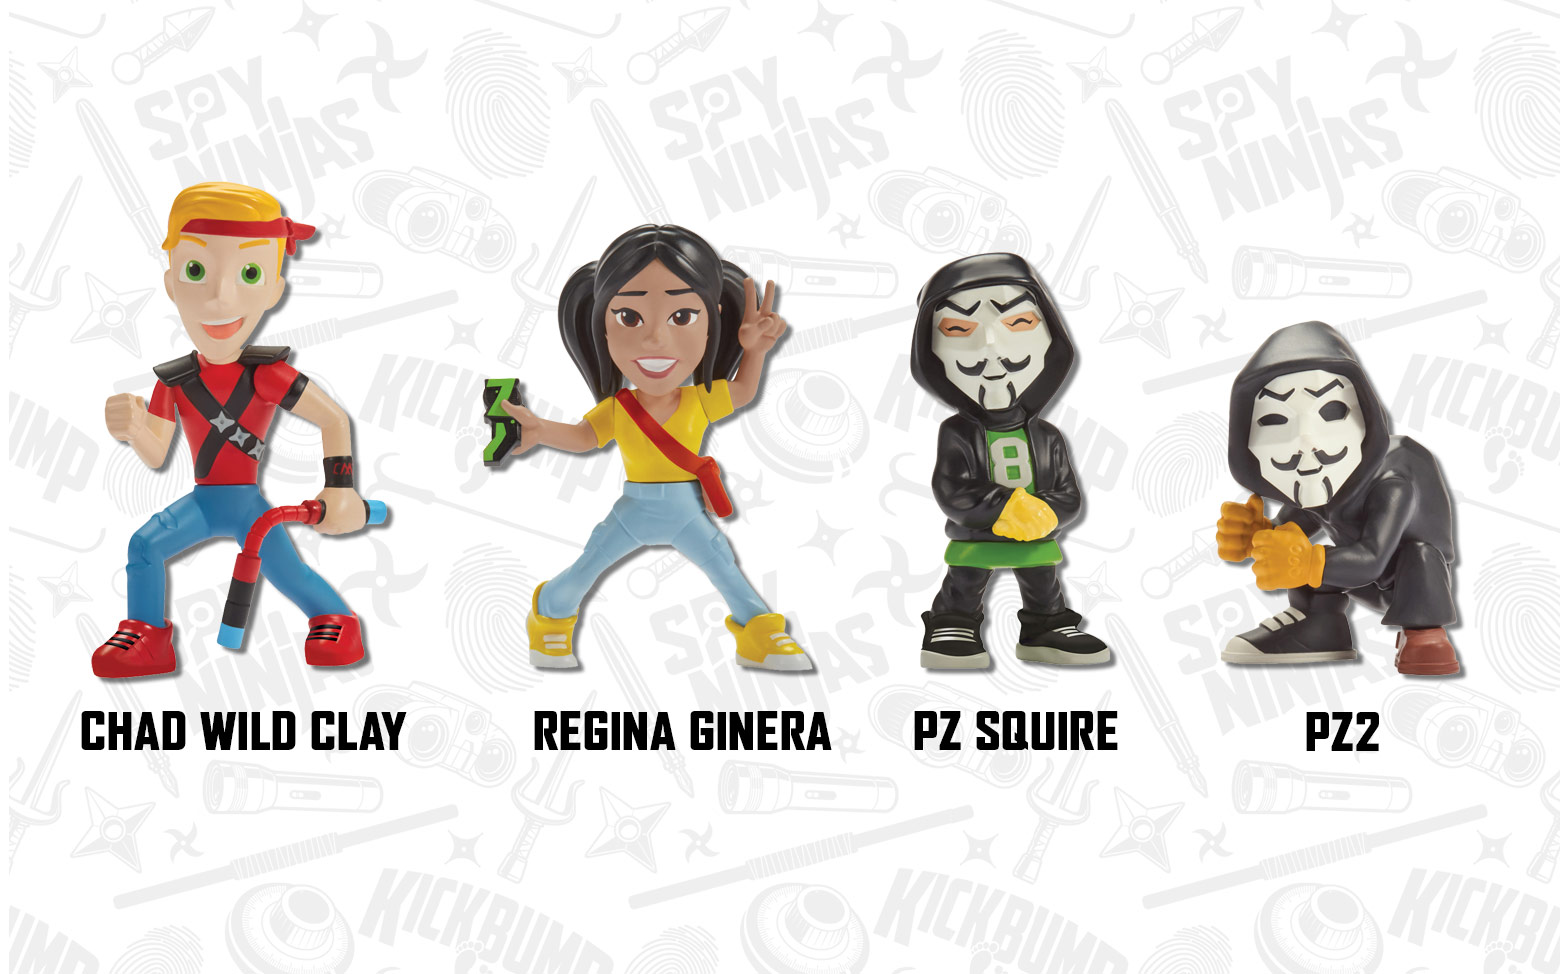 Spy Ninjas Collectible Figure 4-Pack with Chad Multicolor, 41130 